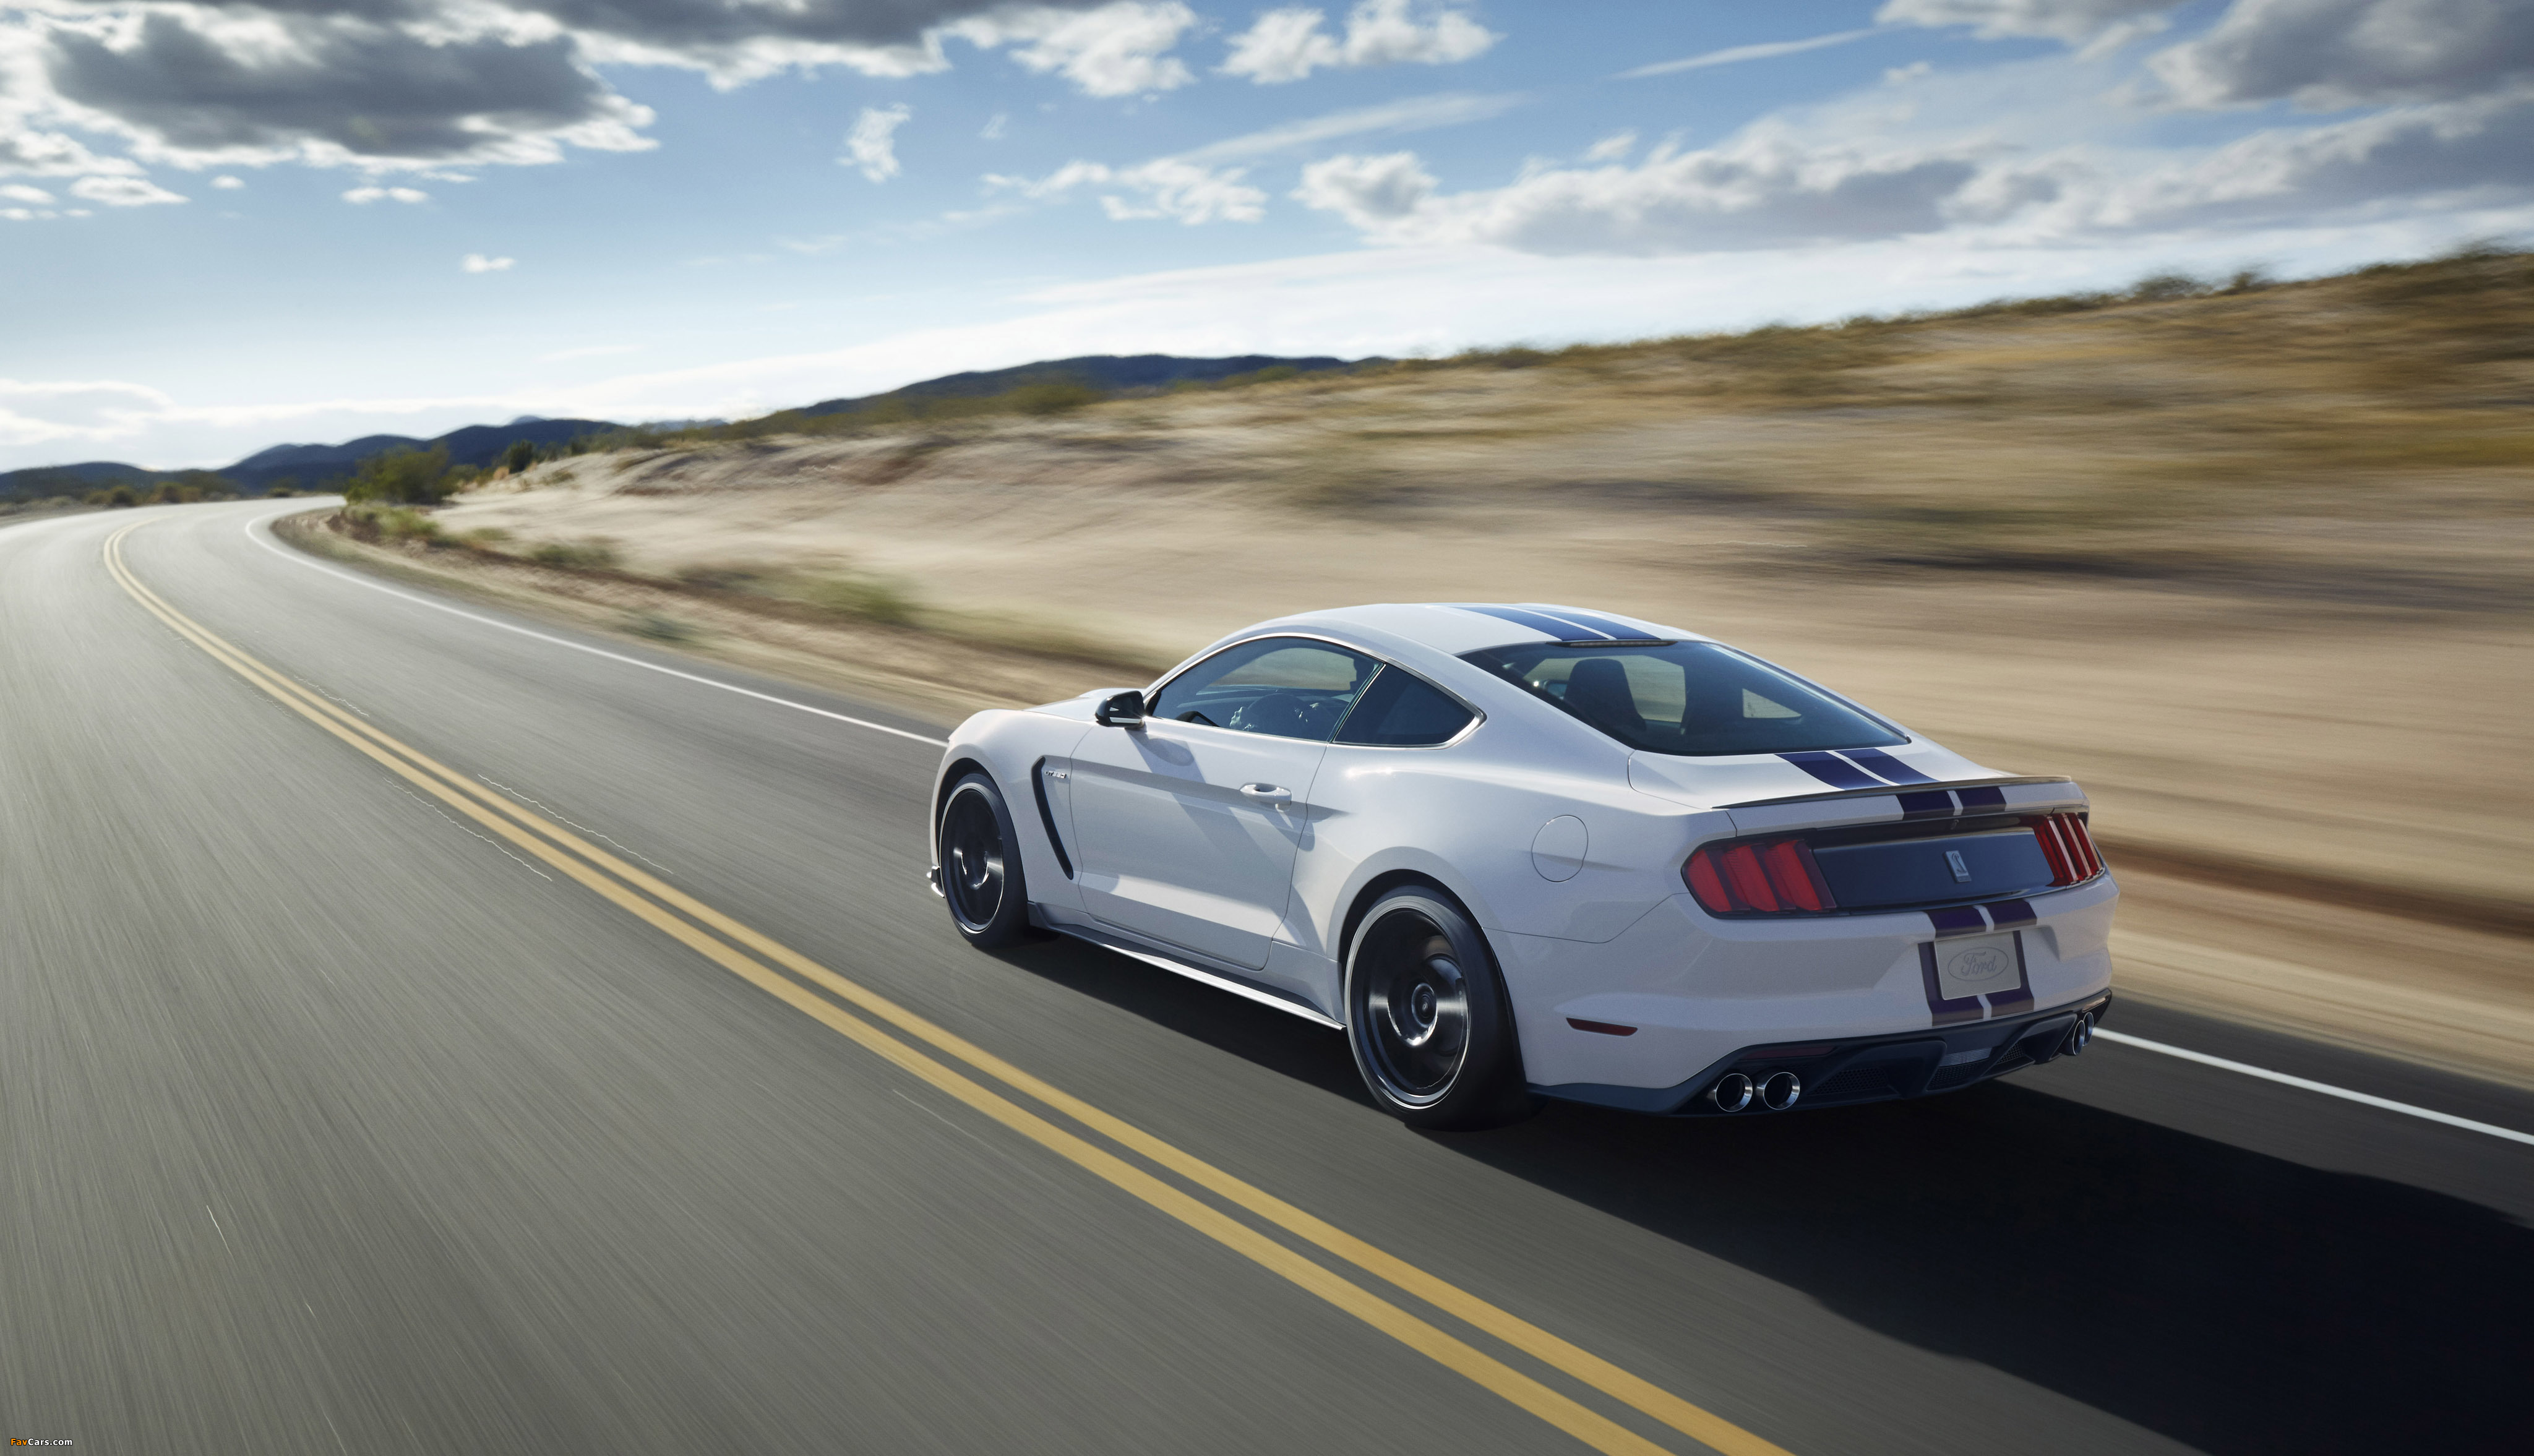 Shelby GT350 Mustang 2015 photos (4096 x 2354)